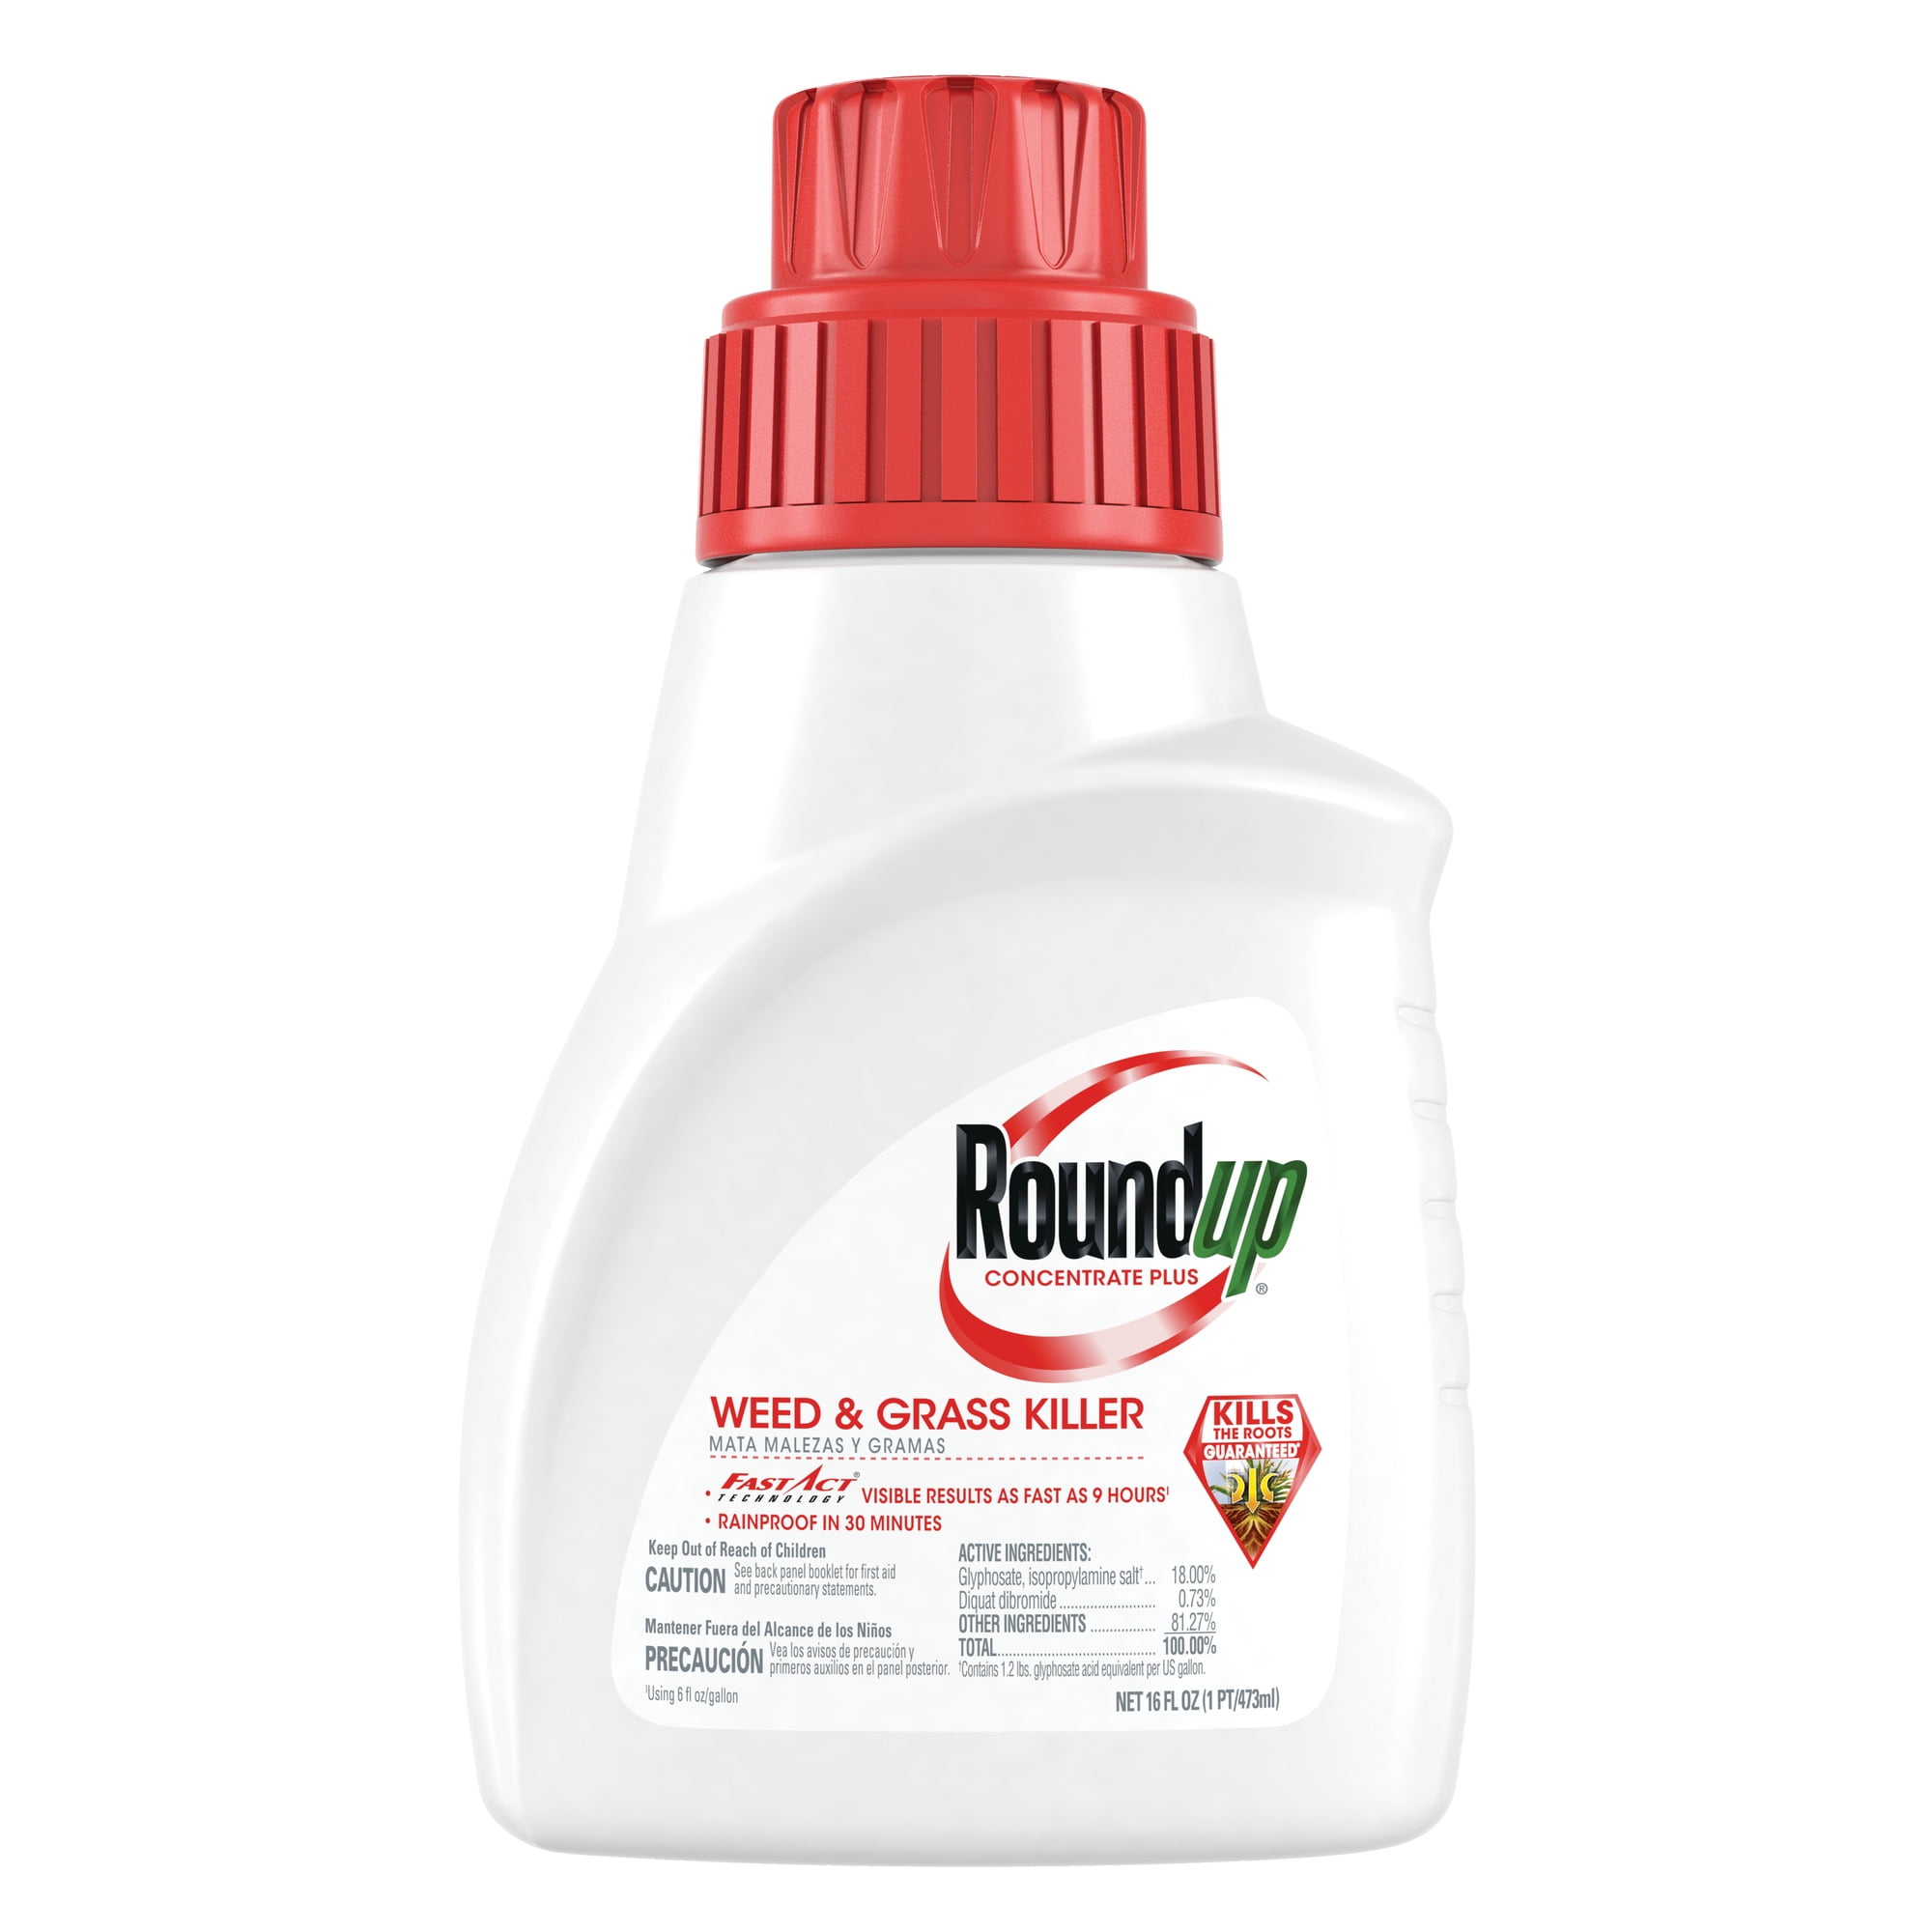 Roundup Concentrate Plus Weed and Grass Killer, 16 oz.